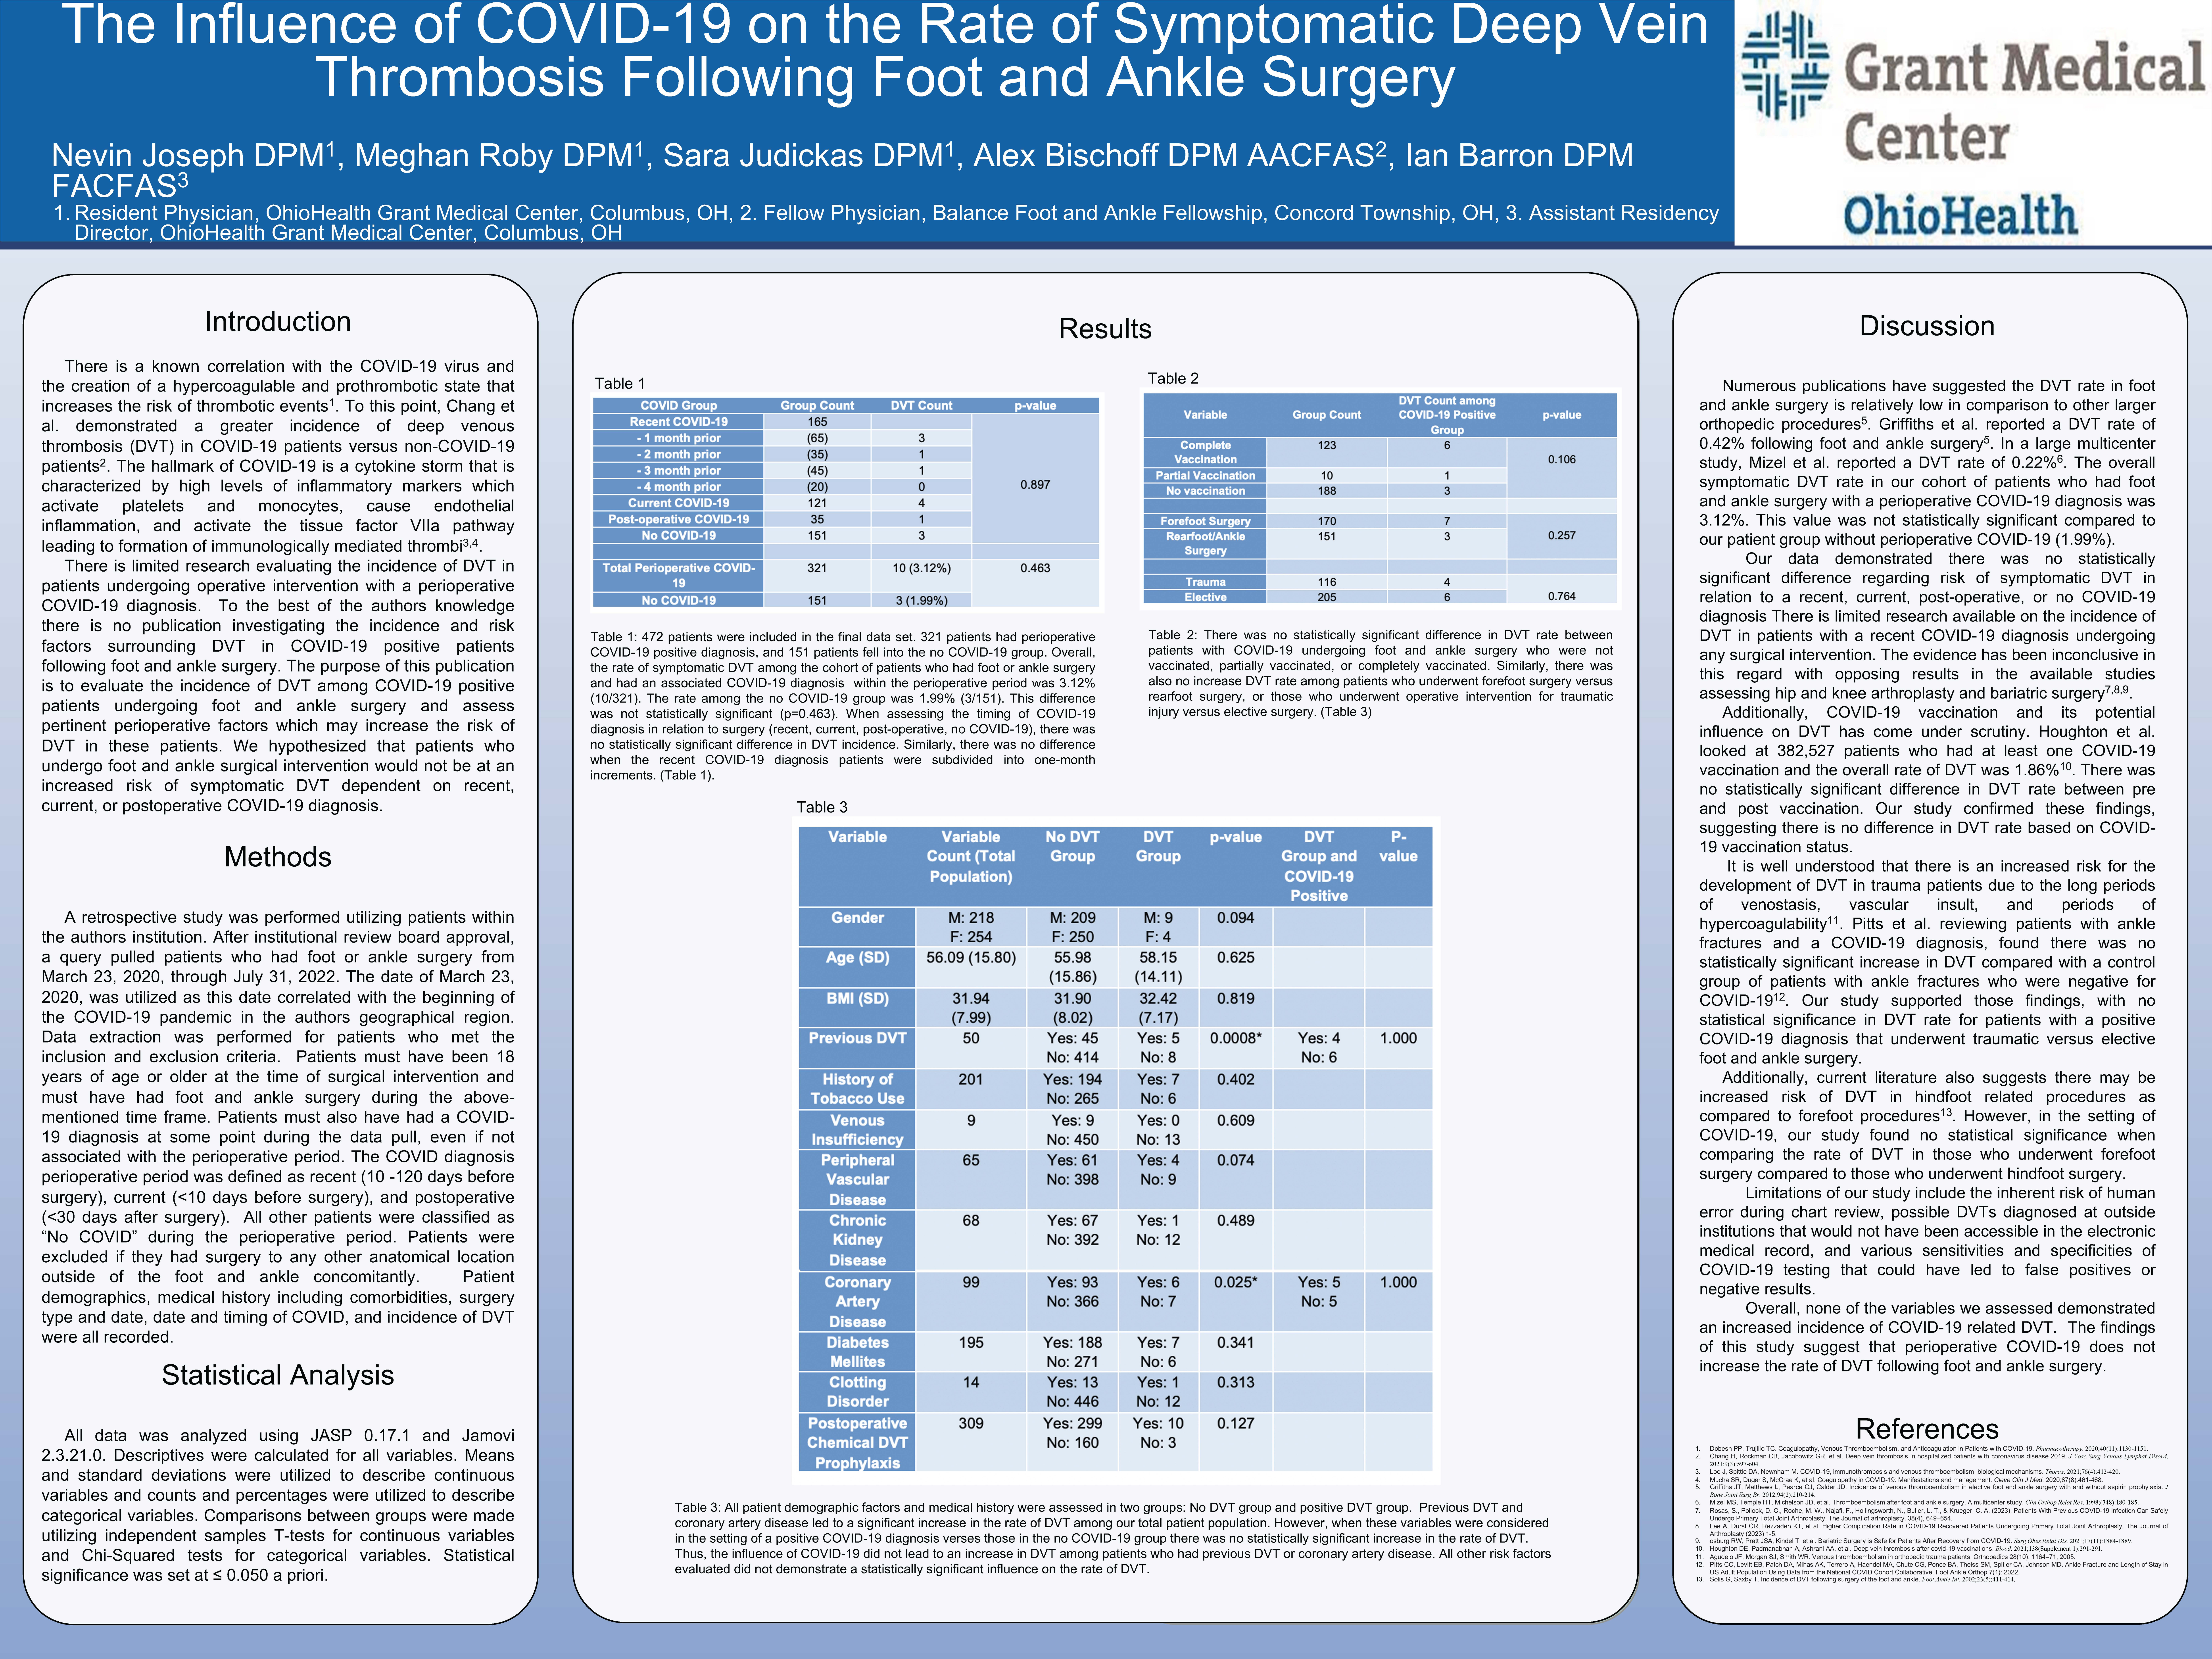 The Influence of COVID-19 on the Rate of Symptomatic Deep Vein Thrombosis Following Foot and Ankle Surgery